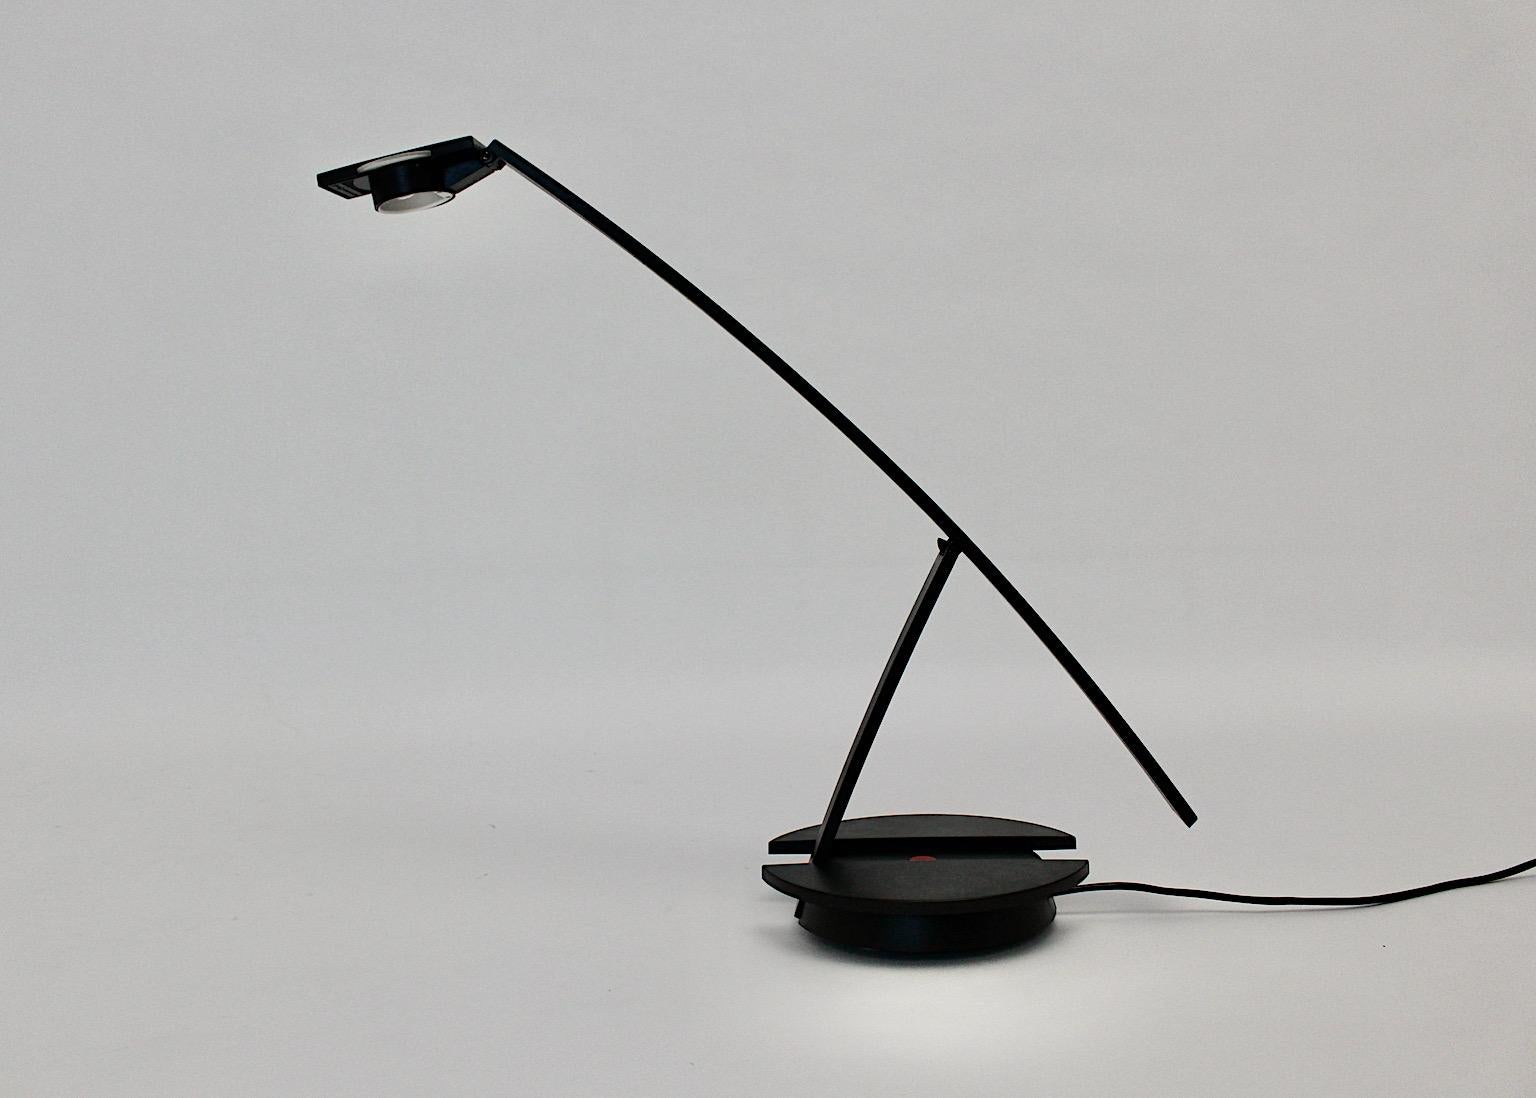 Italian modern table lamp or desk lamp from metal and plastic concorde like in black color by Raul Barbieri for Tronconi Italy, 1980s.
The company's name is labeled underneath the lamp:
Tronconi Master designed by Raul Barbieri Made in Italy 220 V